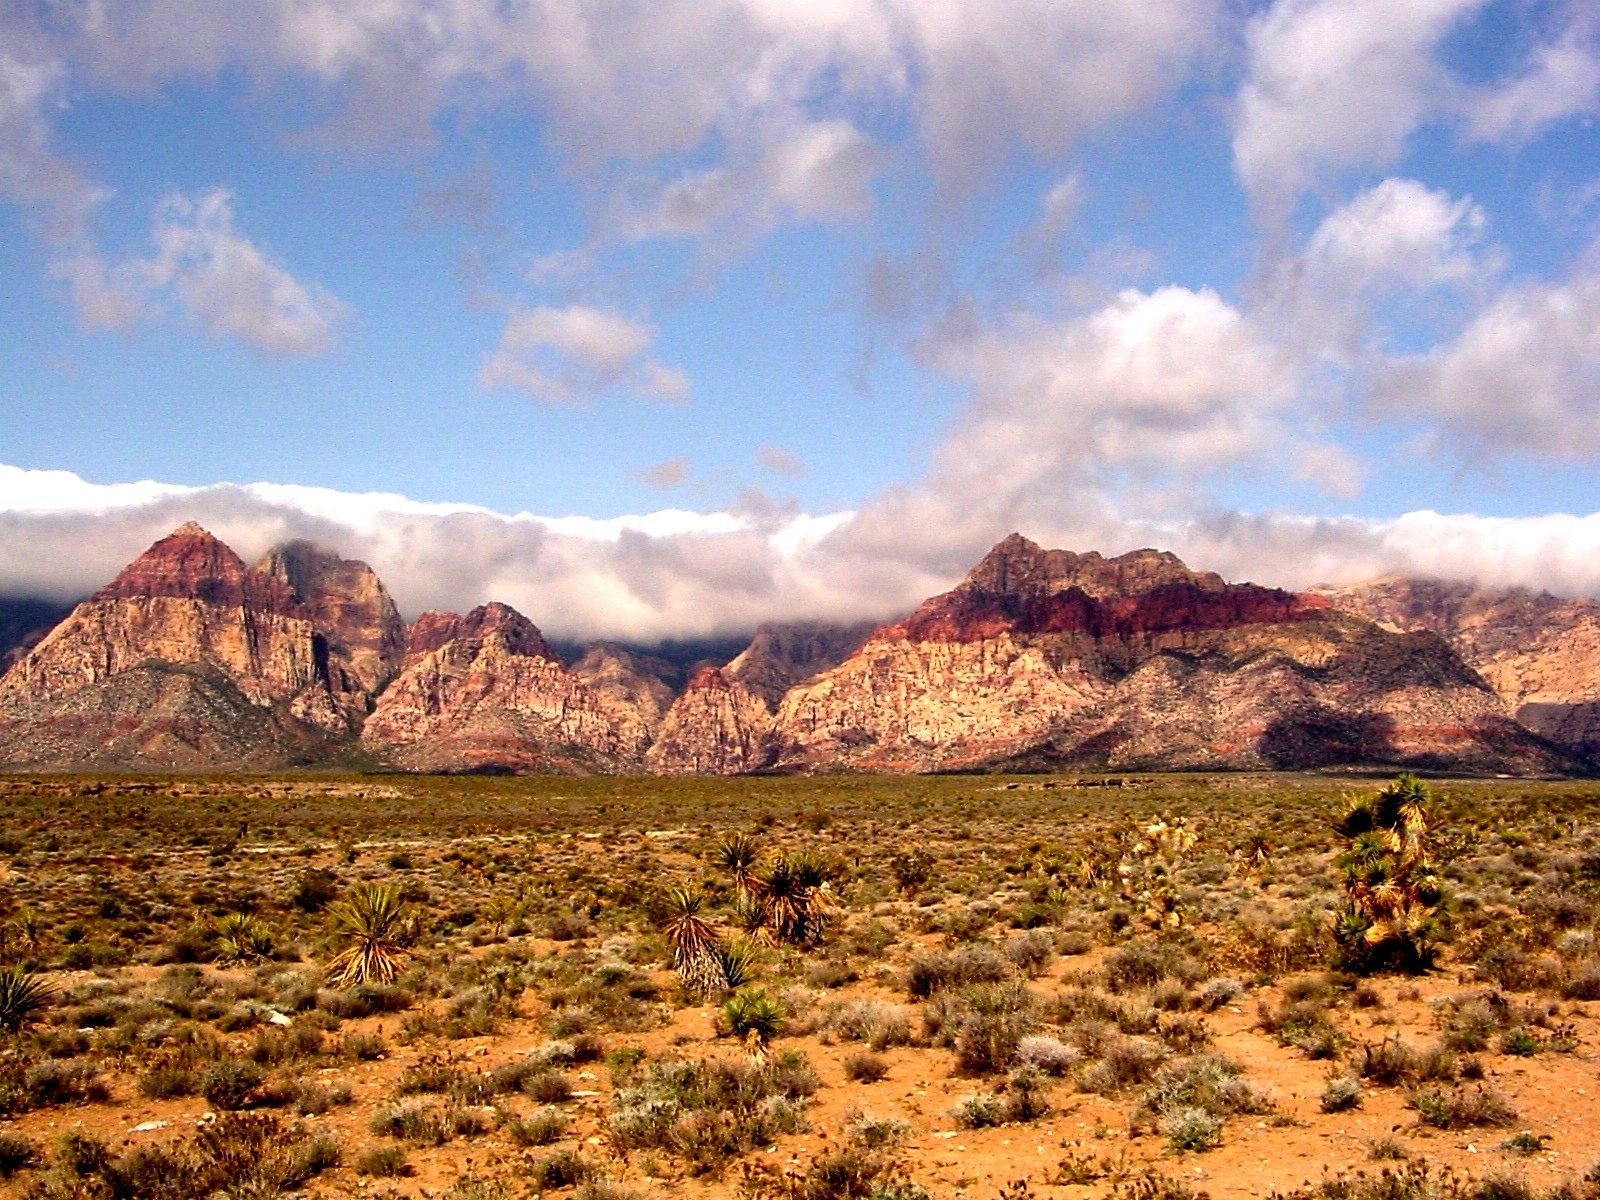 <p>Red Rock Canyon’s proximity to Las Vegas makes it an accessible adventure destination. The area’s rock climbing and hiking trails offer thrilling challenges and stunning views. The scenic loop drive provides a great overview of the canyon’s beauty. Wildlife sightings, including desert tortoises and bighorn sheep, are common.</p>